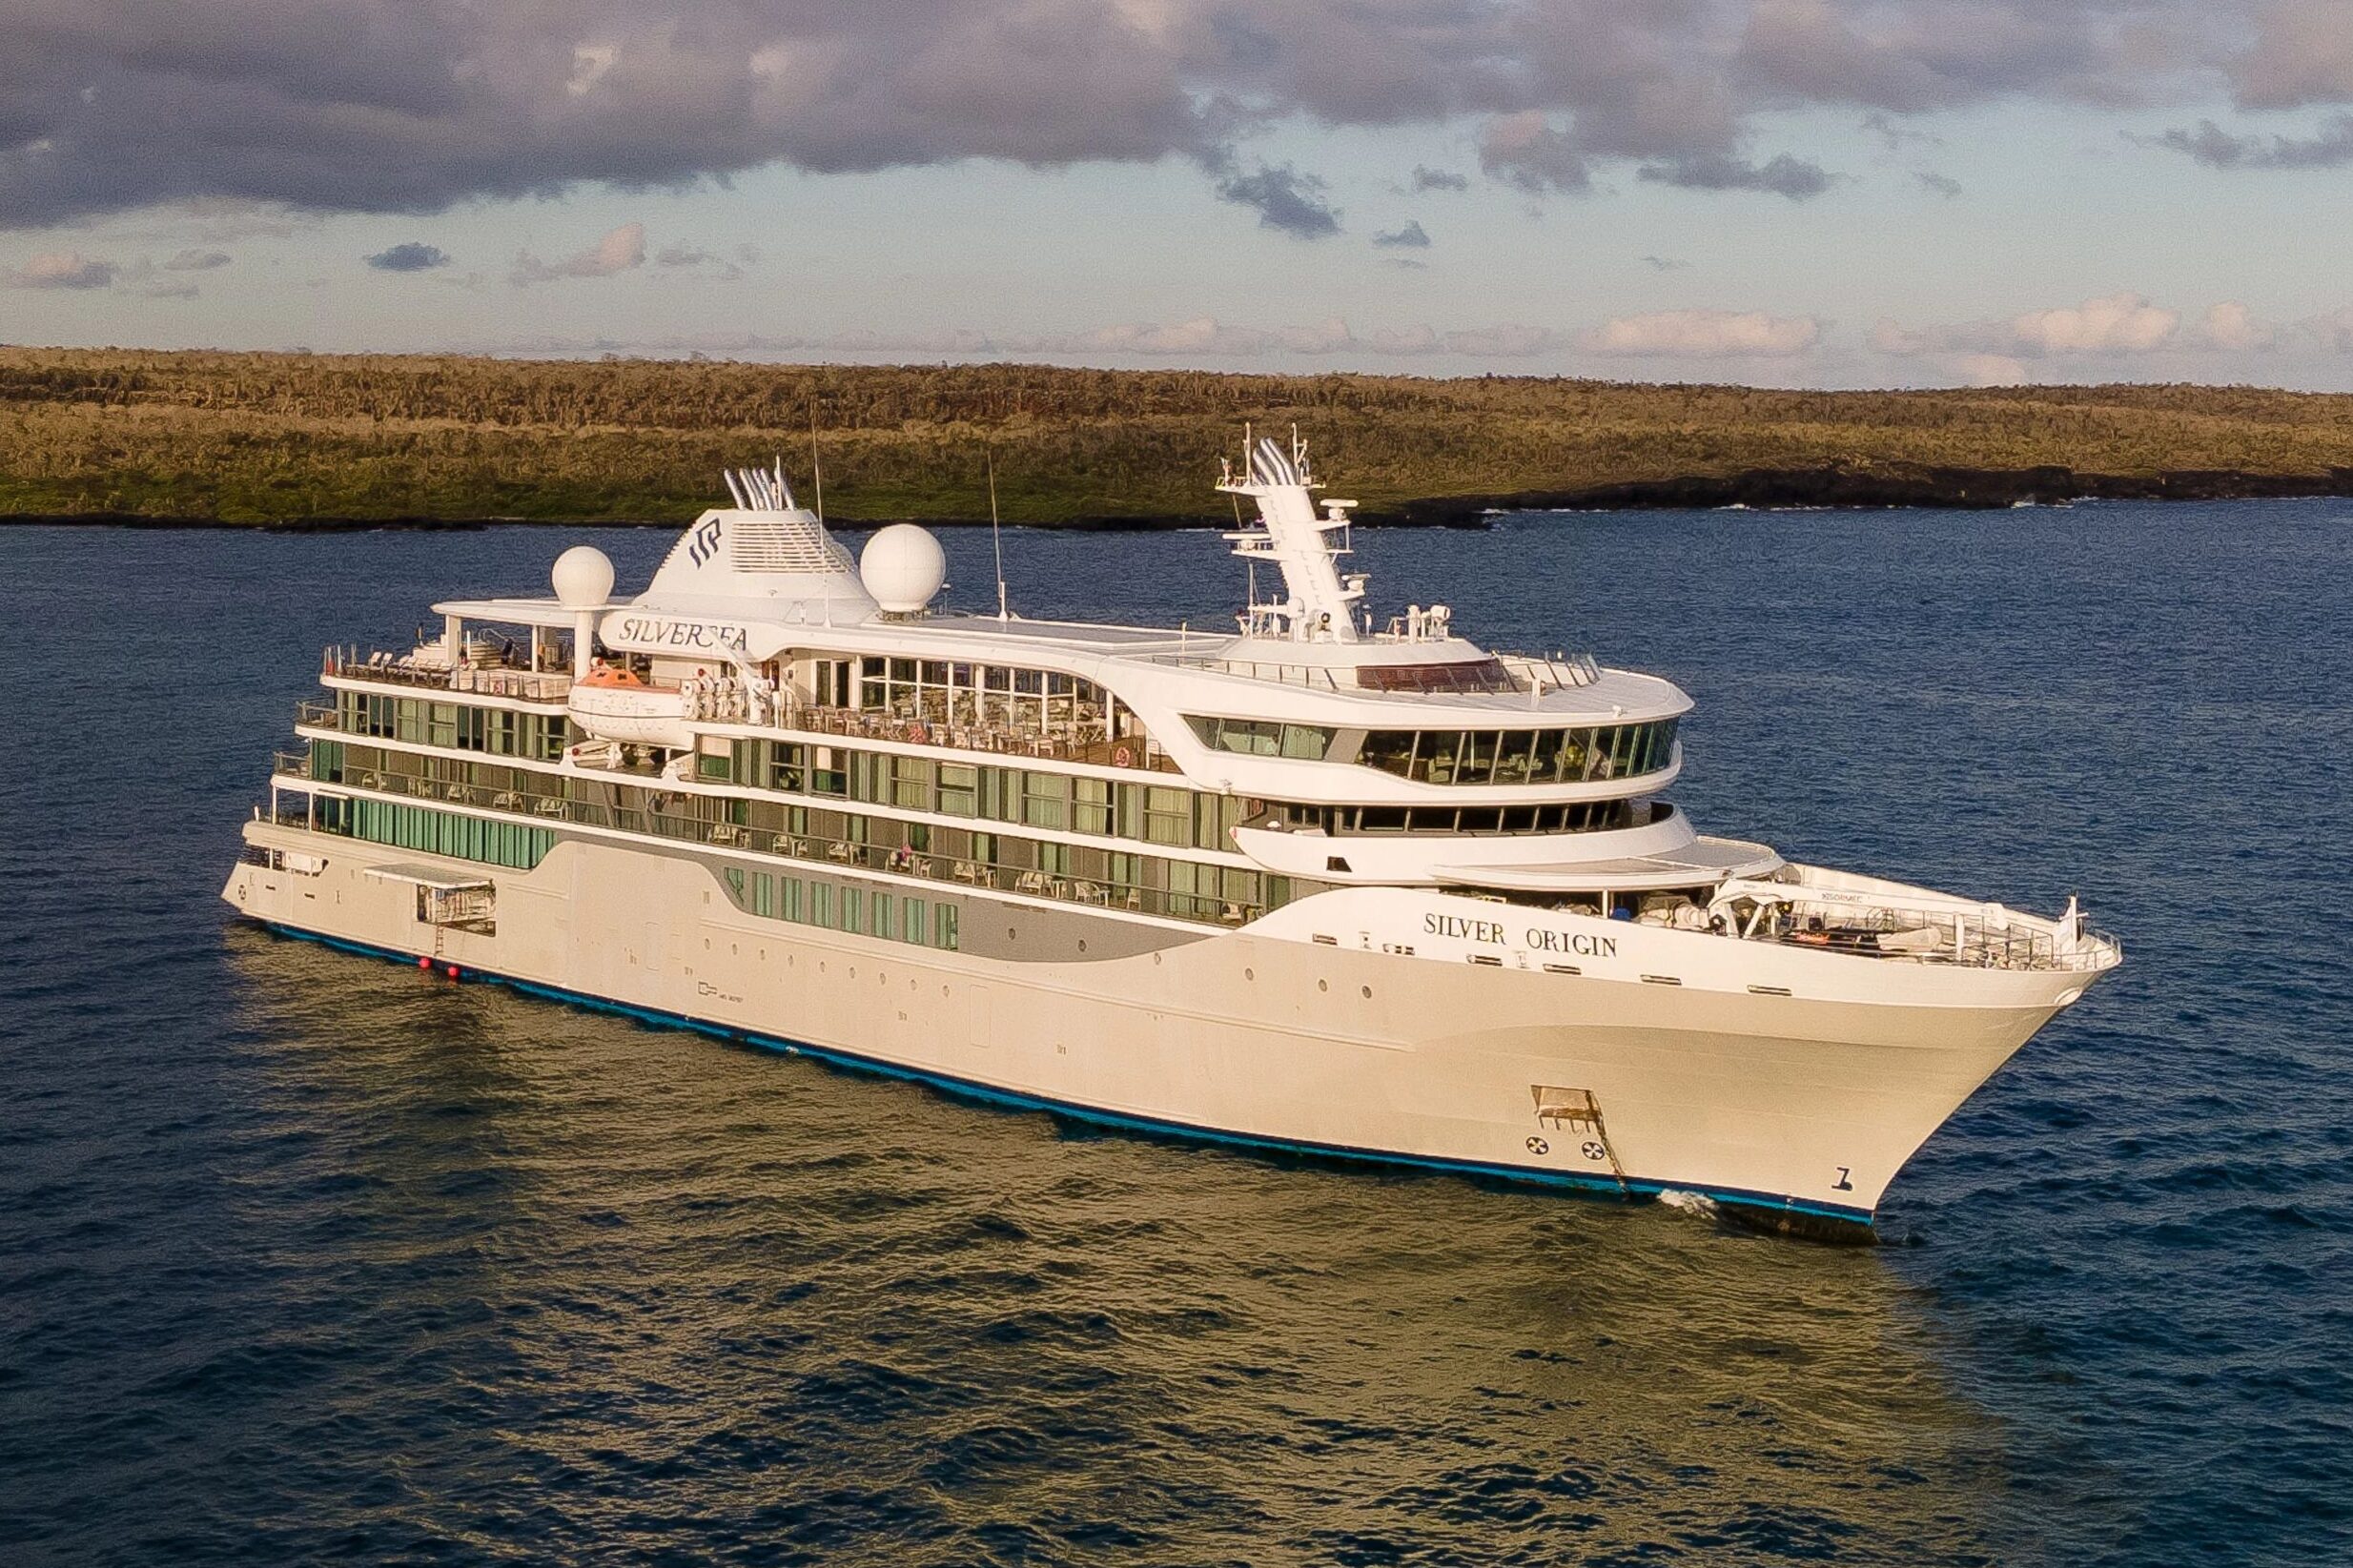 Silversea's Silver Origin lowers its impact on the Galápagos island by moving all but organic waste out of the islands.